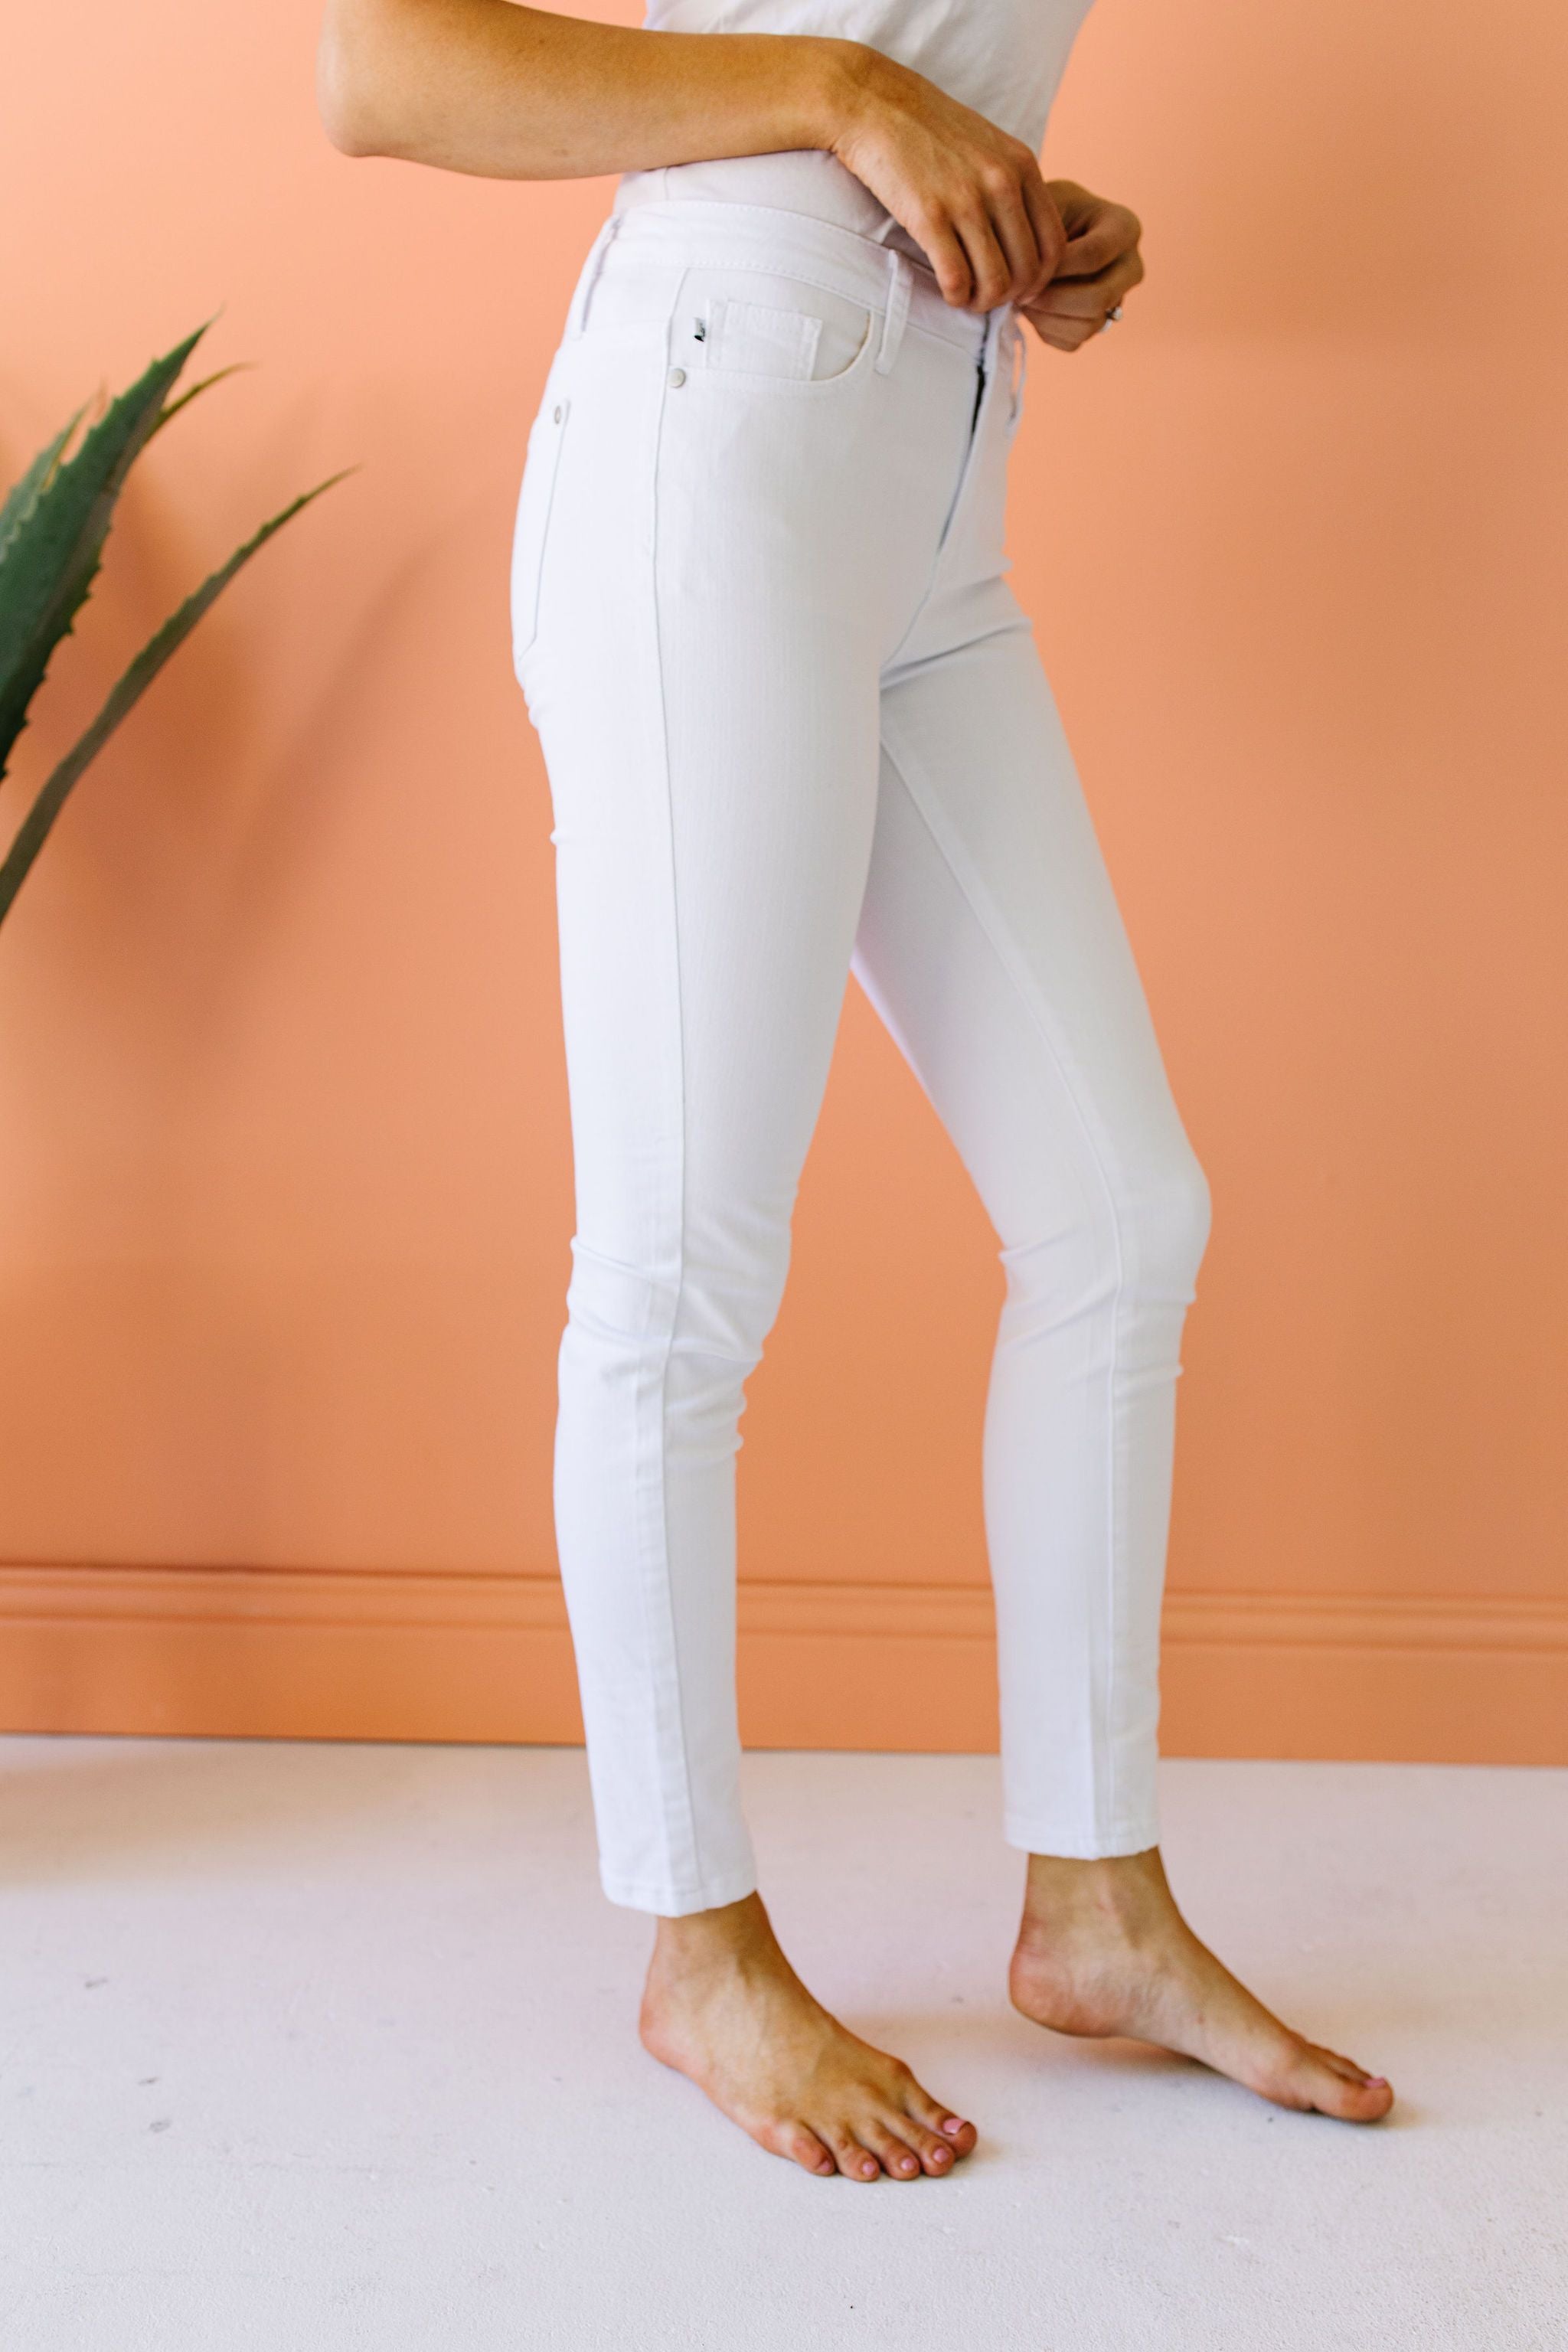 Keeping It Tight White Jeans